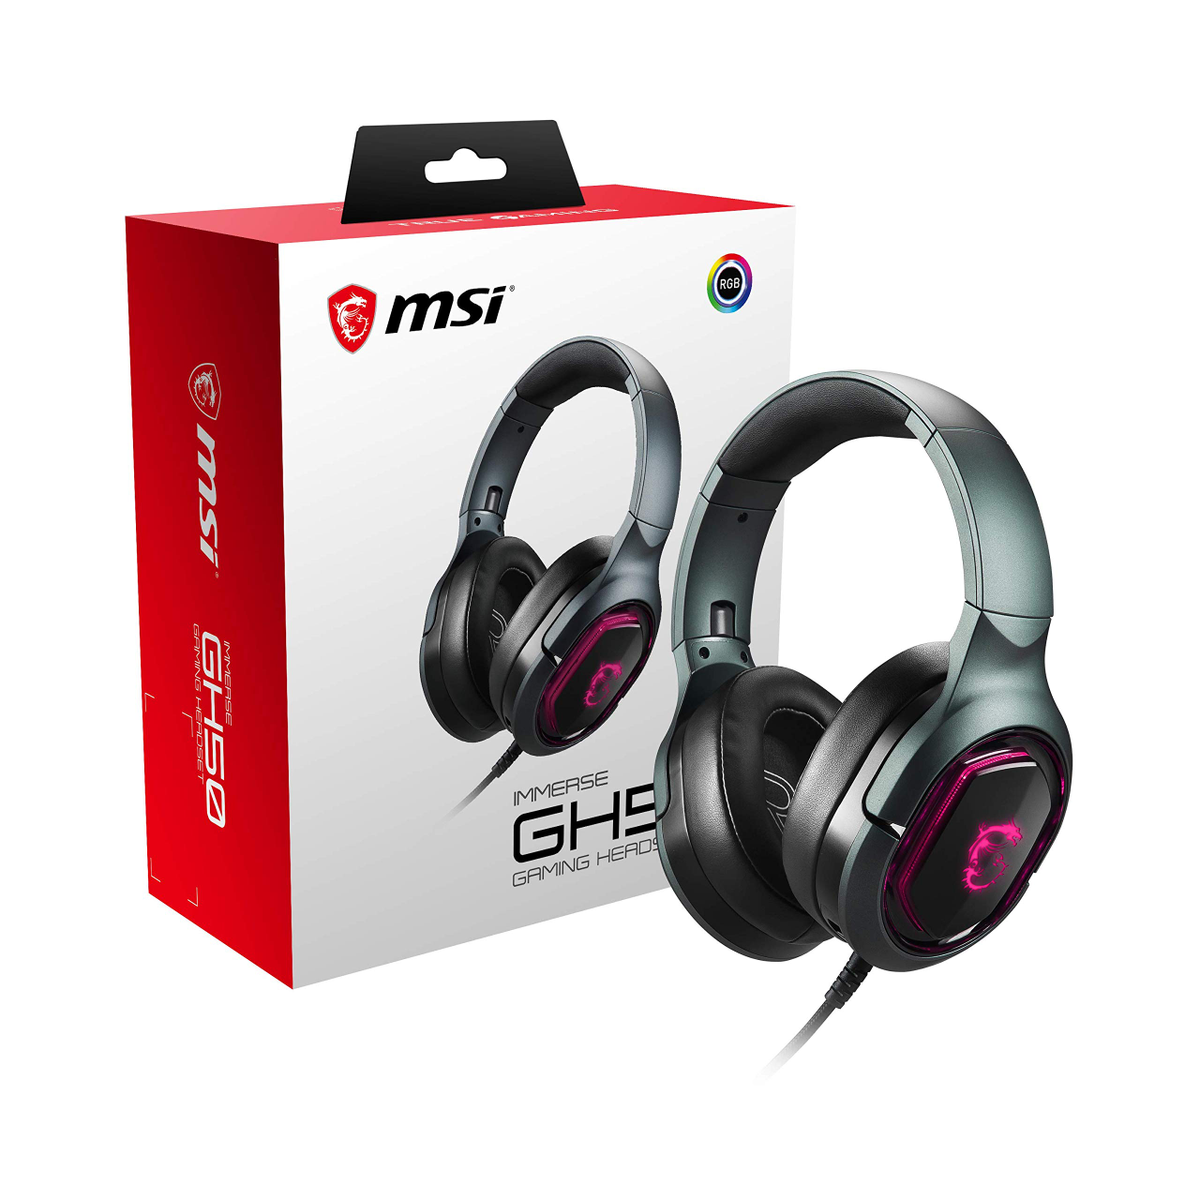 S37-0400020-SV1 GAMING Gaming GH50 Schwarz HEADSET, IMMERSE MSI Over-ear Headset